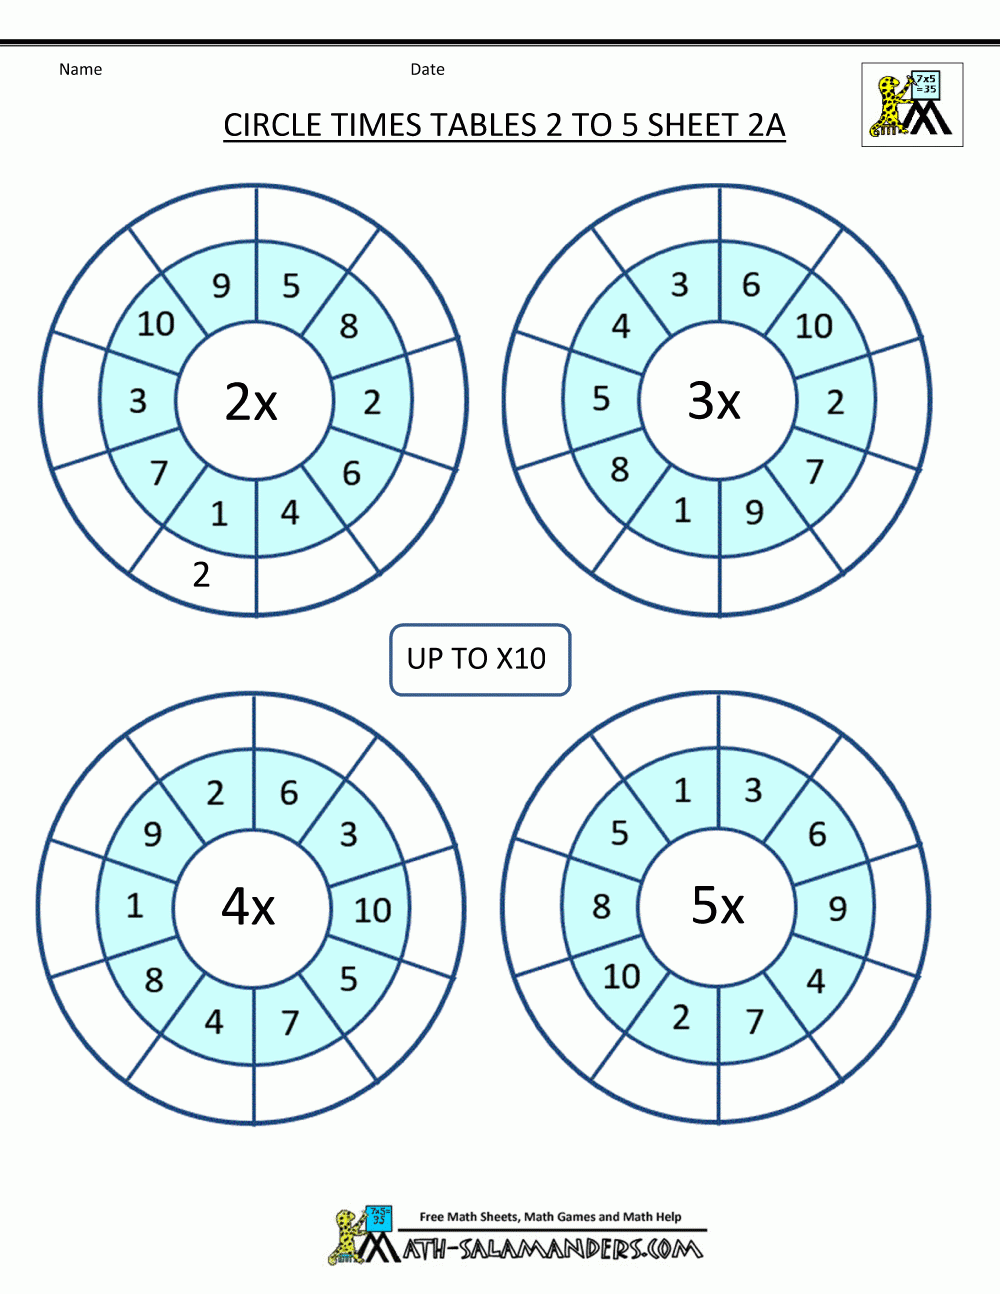 Times Tables Worksheets Circles 1 To 10 Times Tables | Times